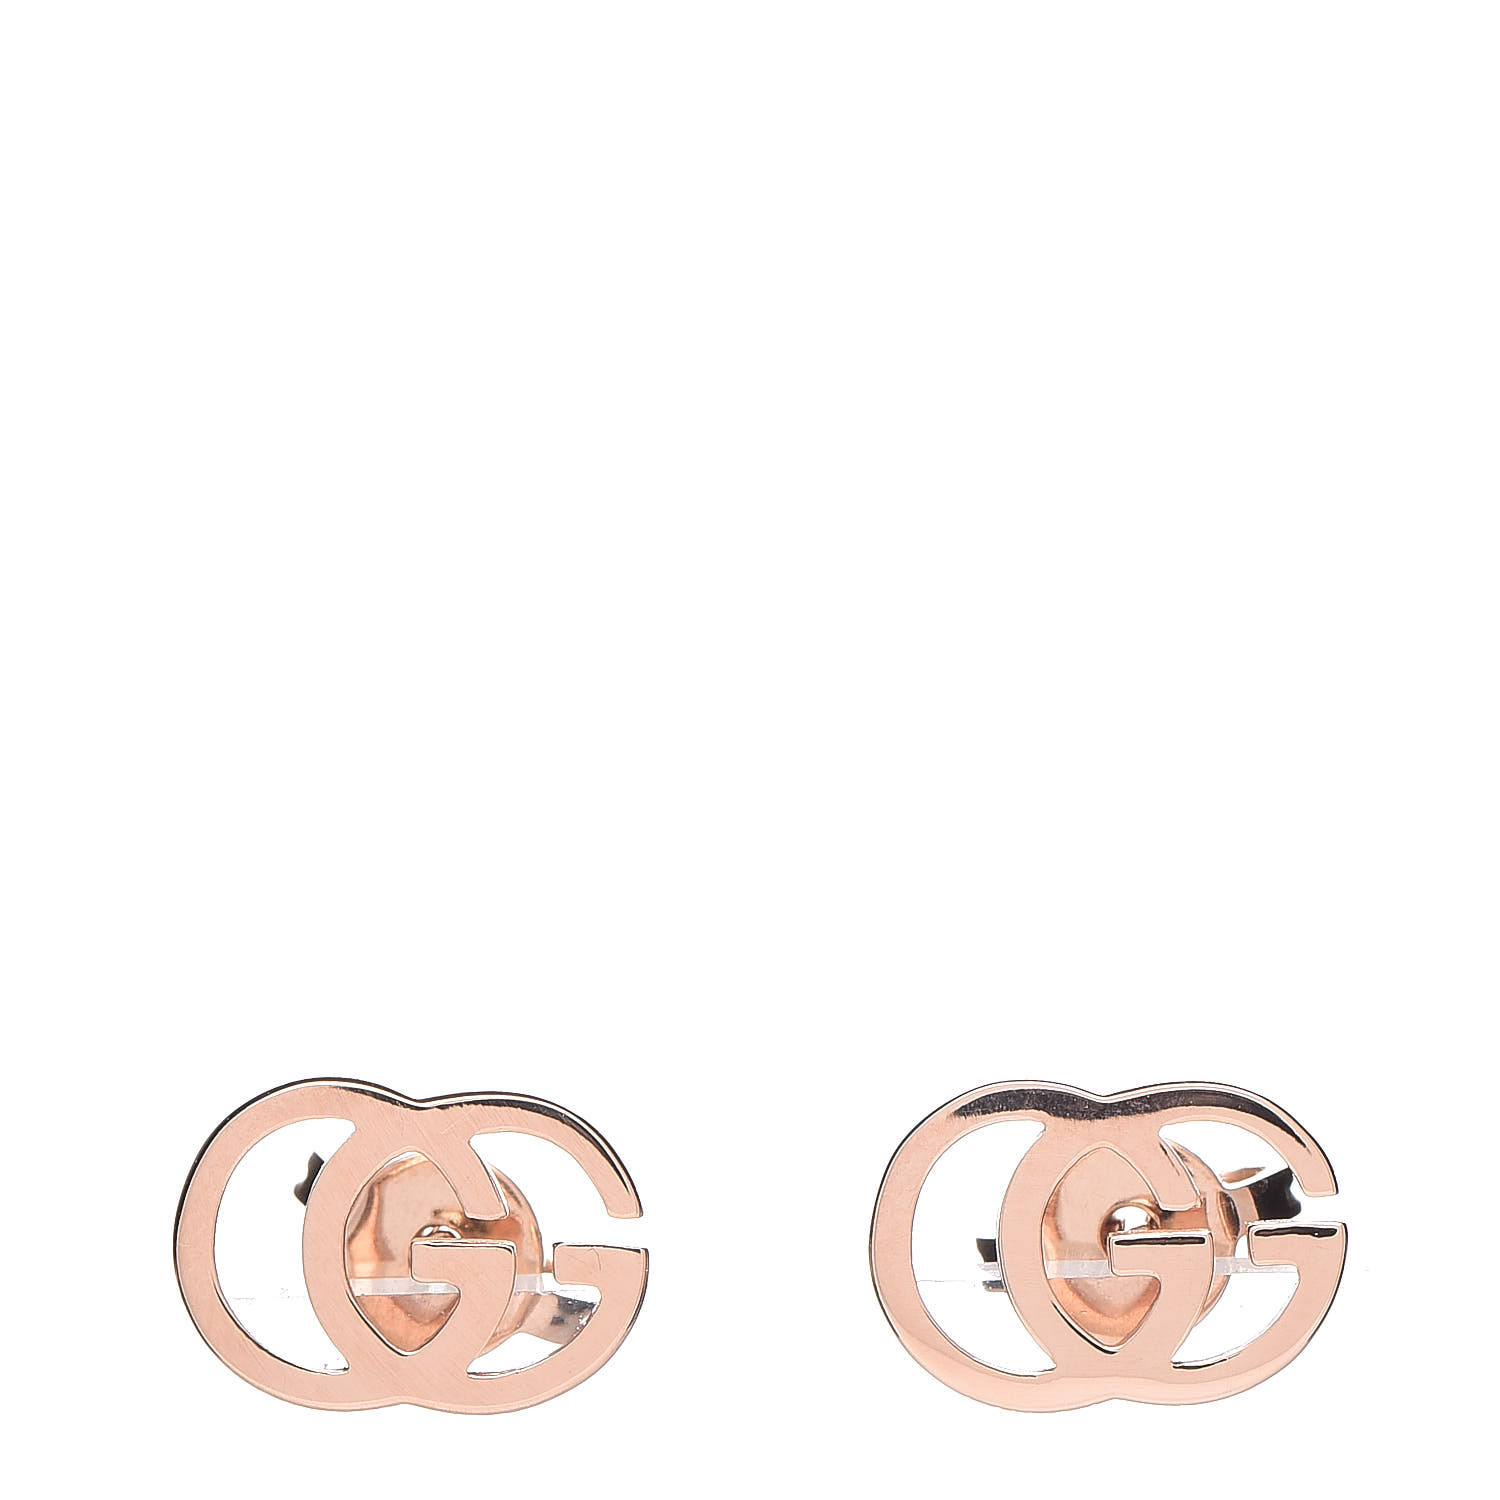 gucci earrings rose gold